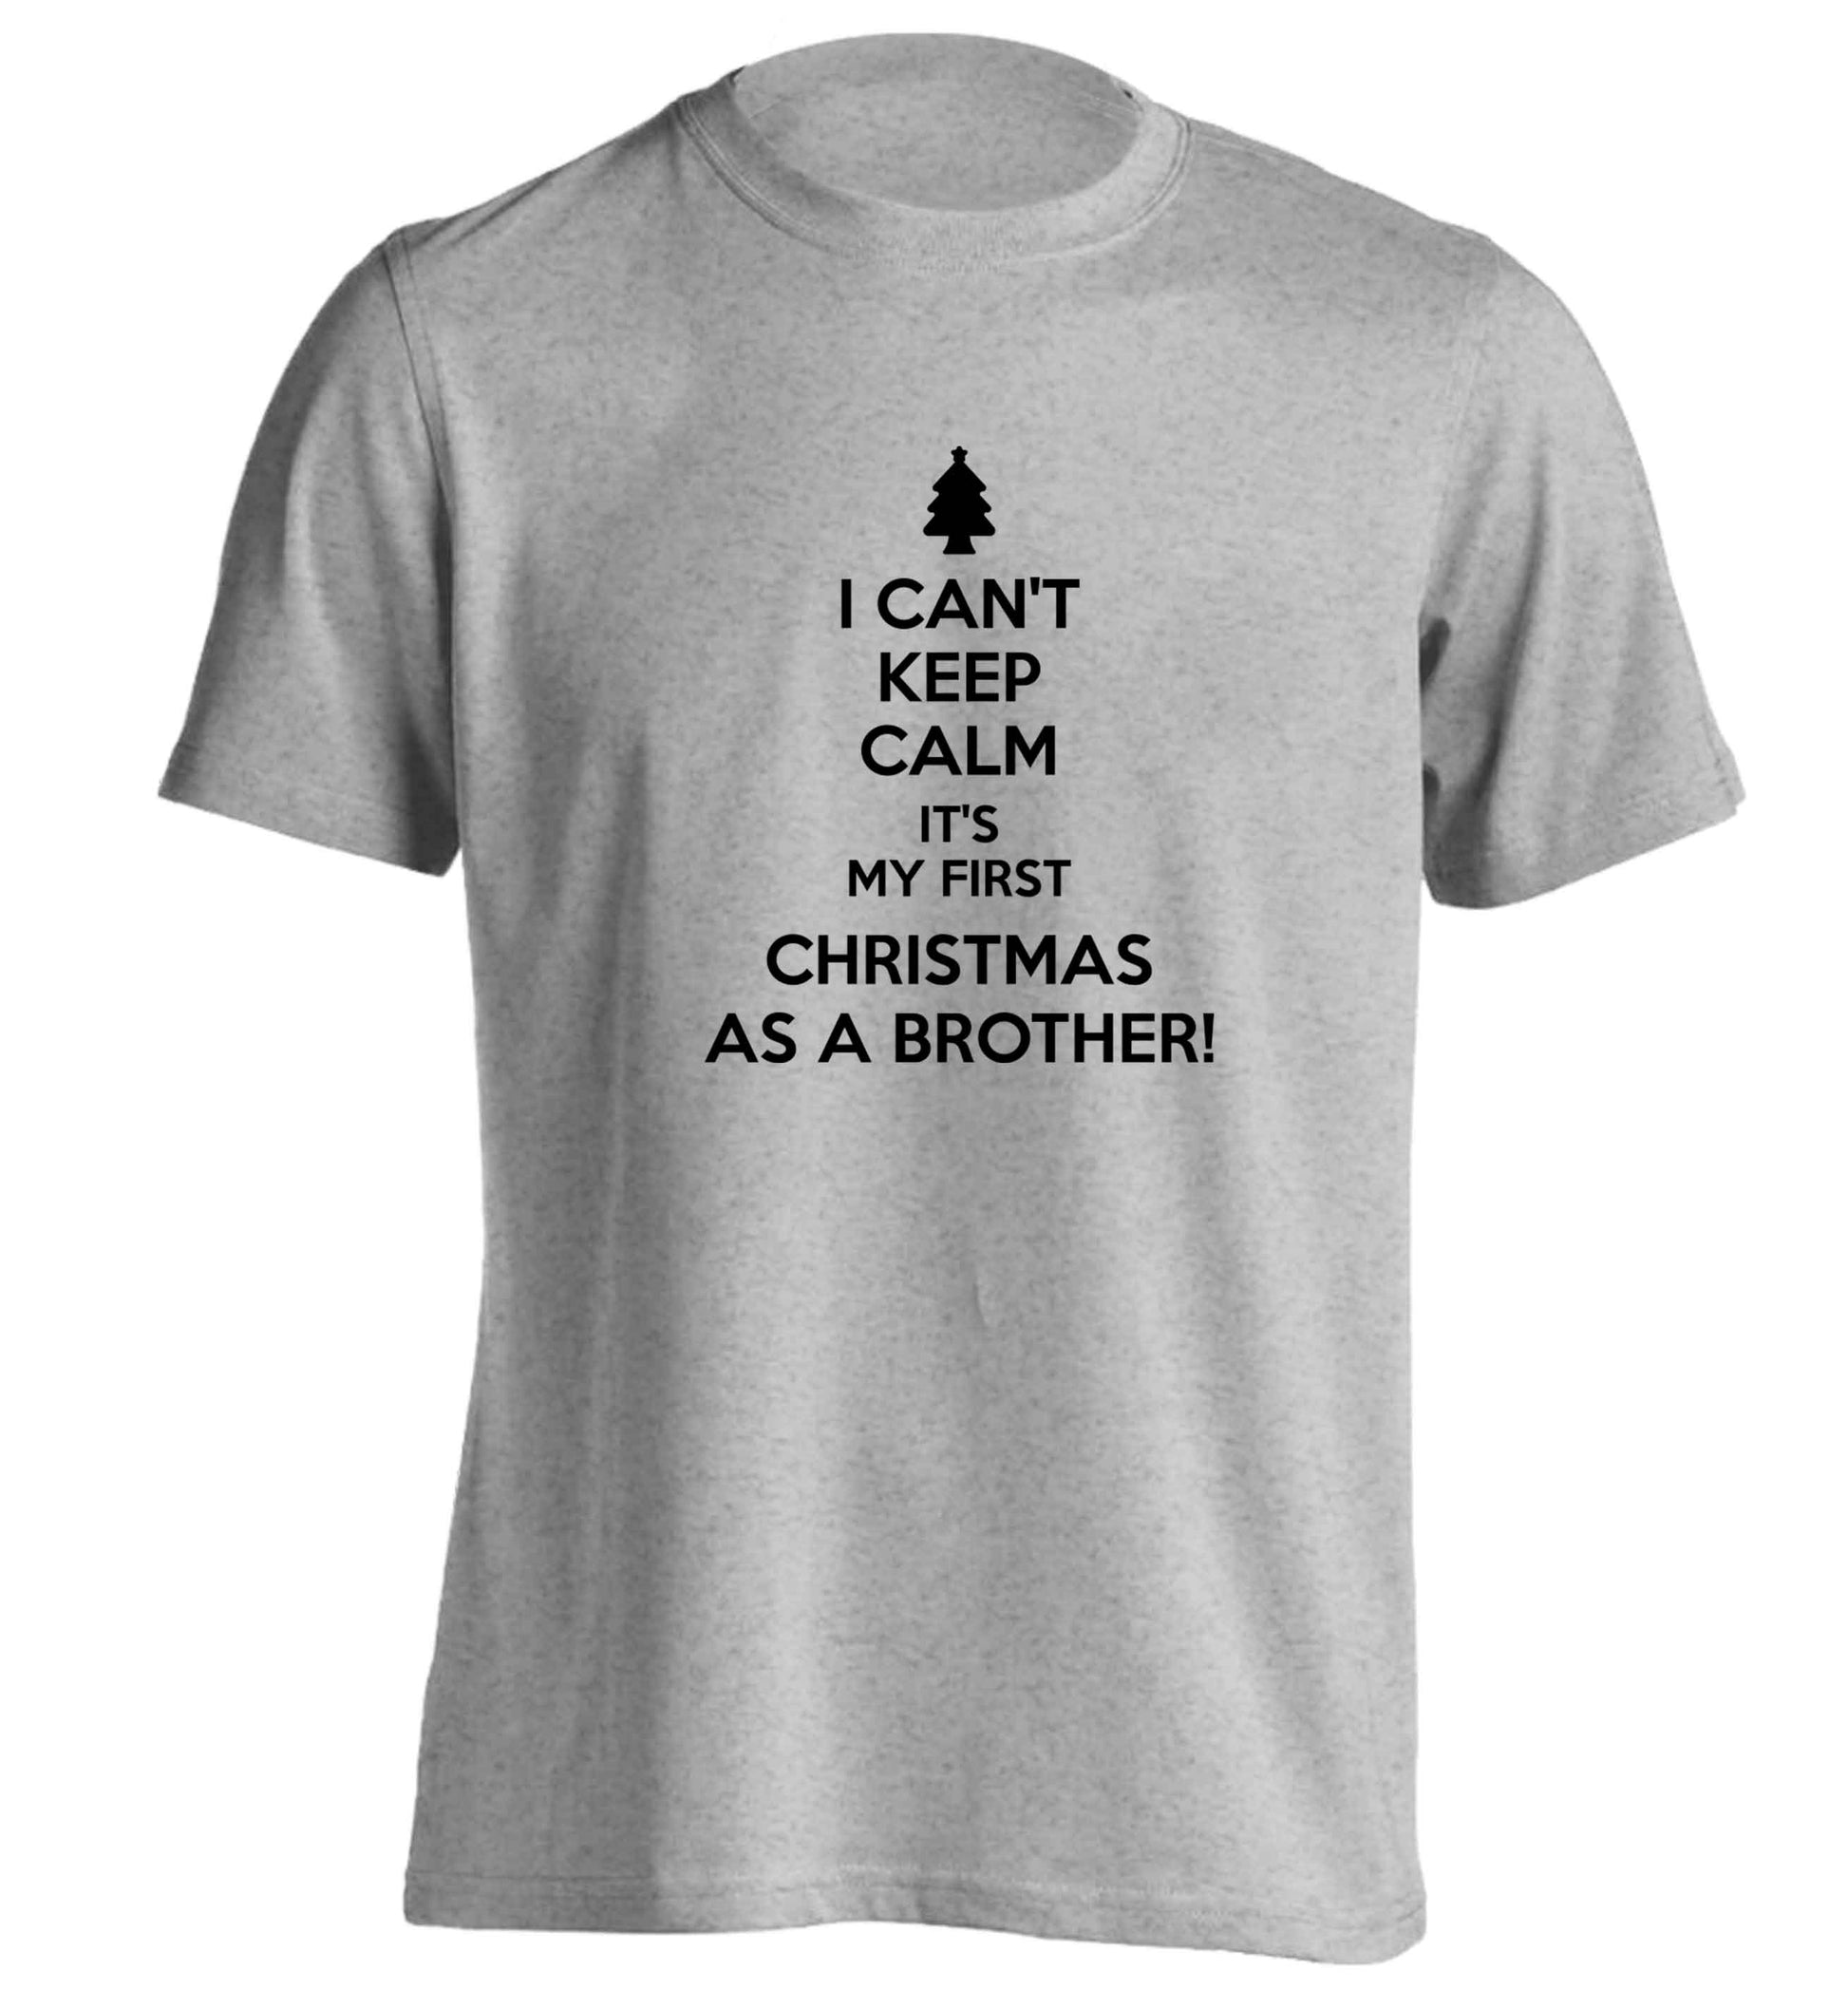 I can't keep calm it's my first Christmas as a brother! adults unisex grey Tshirt 2XL